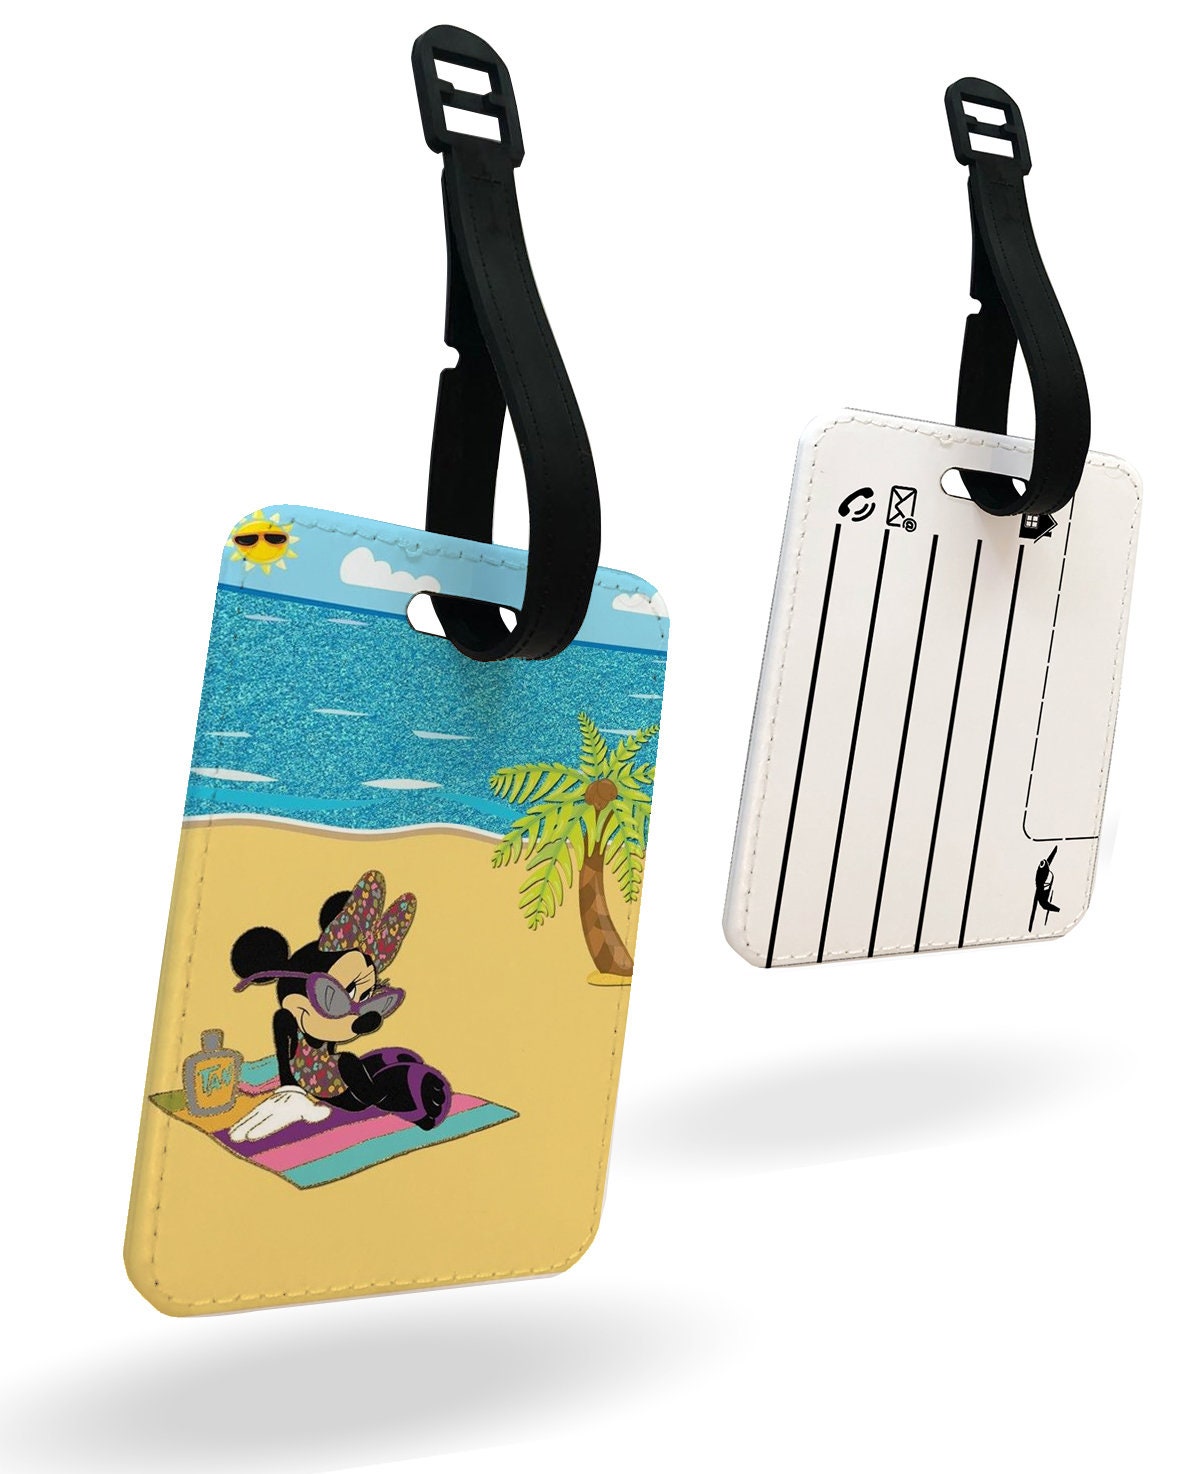 Personalised Faux Leather Passport Cover and Luggage Tag Disney Minnie Mouse on Beach Holidays Summer Mickey Mouse Disneyland Adventure Gift